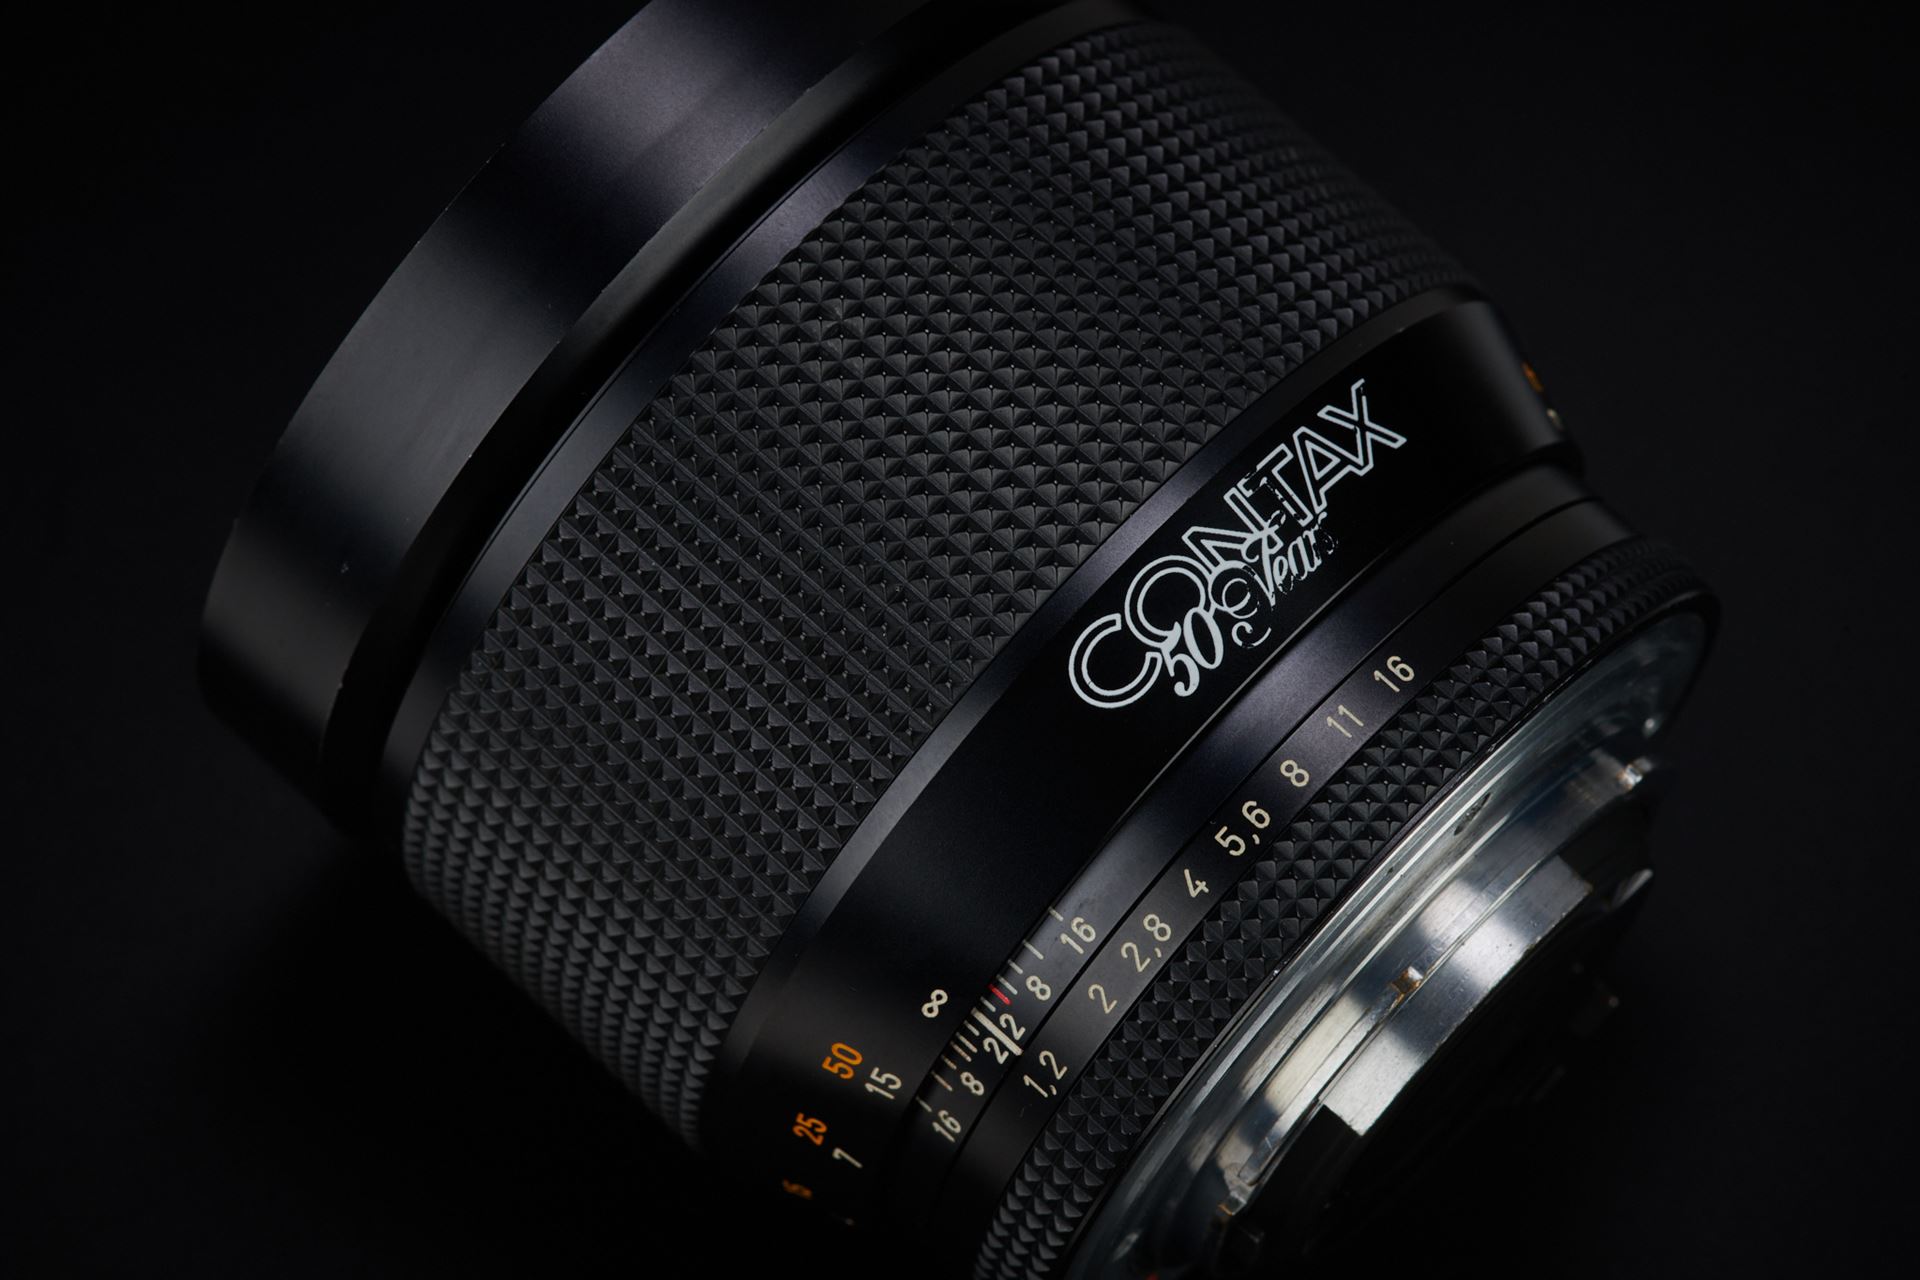 Picture of contax planar 85mm f/1.2 t* 50th jahre